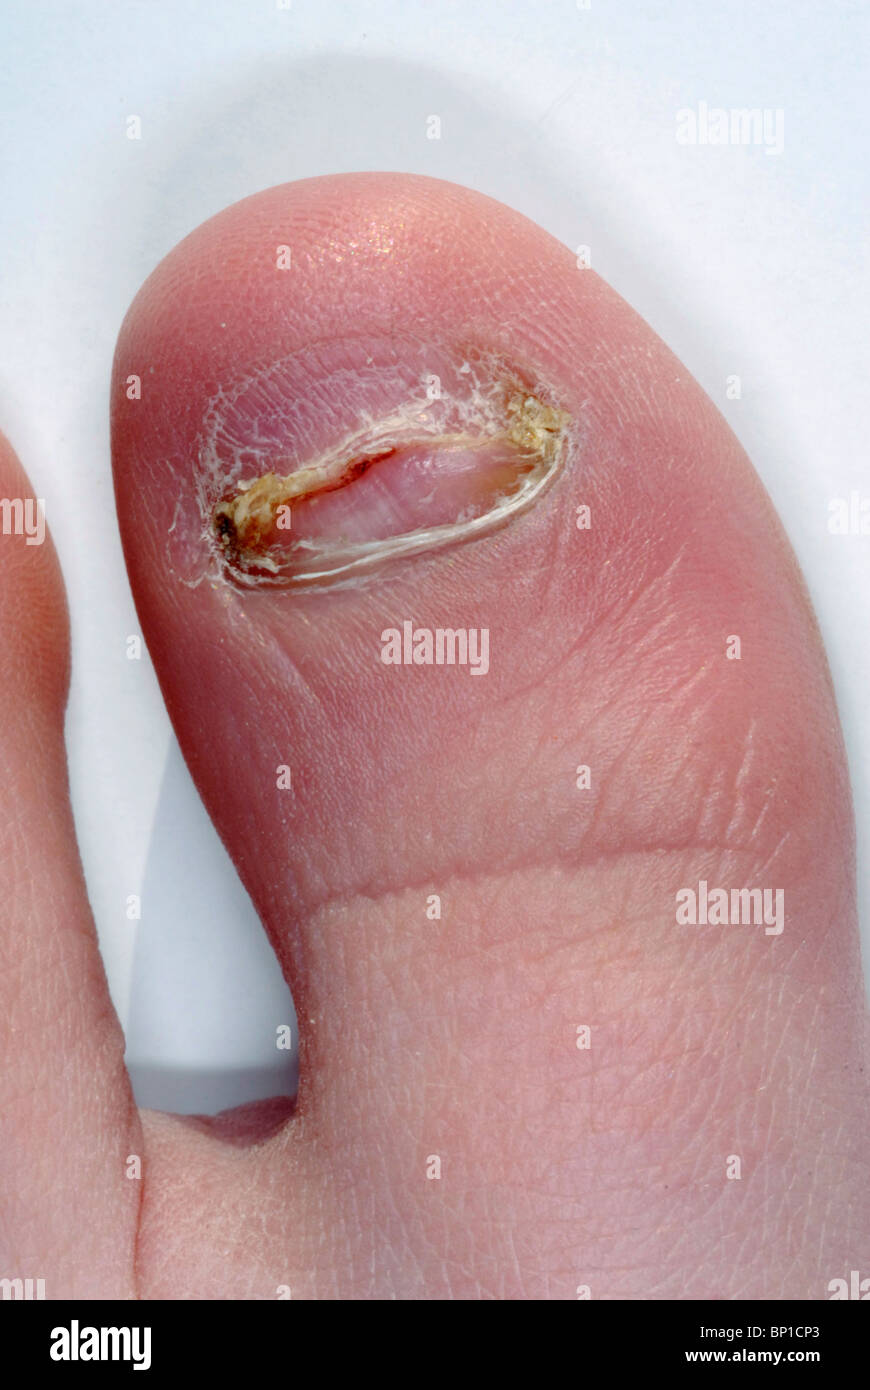 boy's foot showing bitten and picked toenails Stock Photo